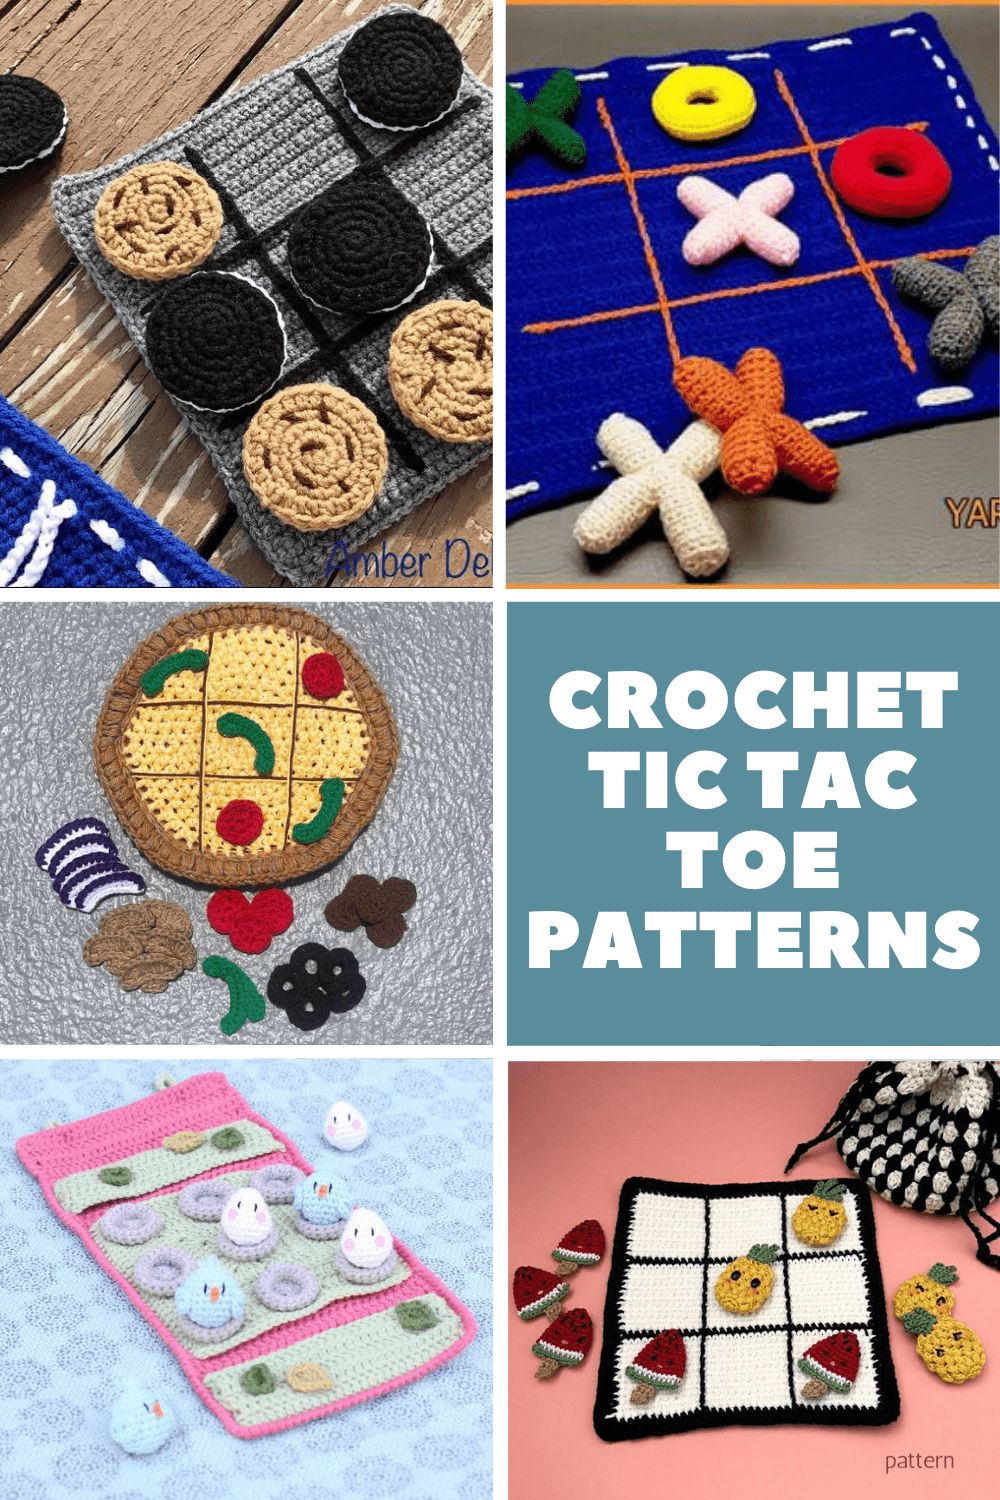 You can't beat a good old fashioned game of tic tac toe - and these crochet patterns will help you make a game that's tactile and fun for kids of all ages! Great birthday gift or stocking stuffer ideas!